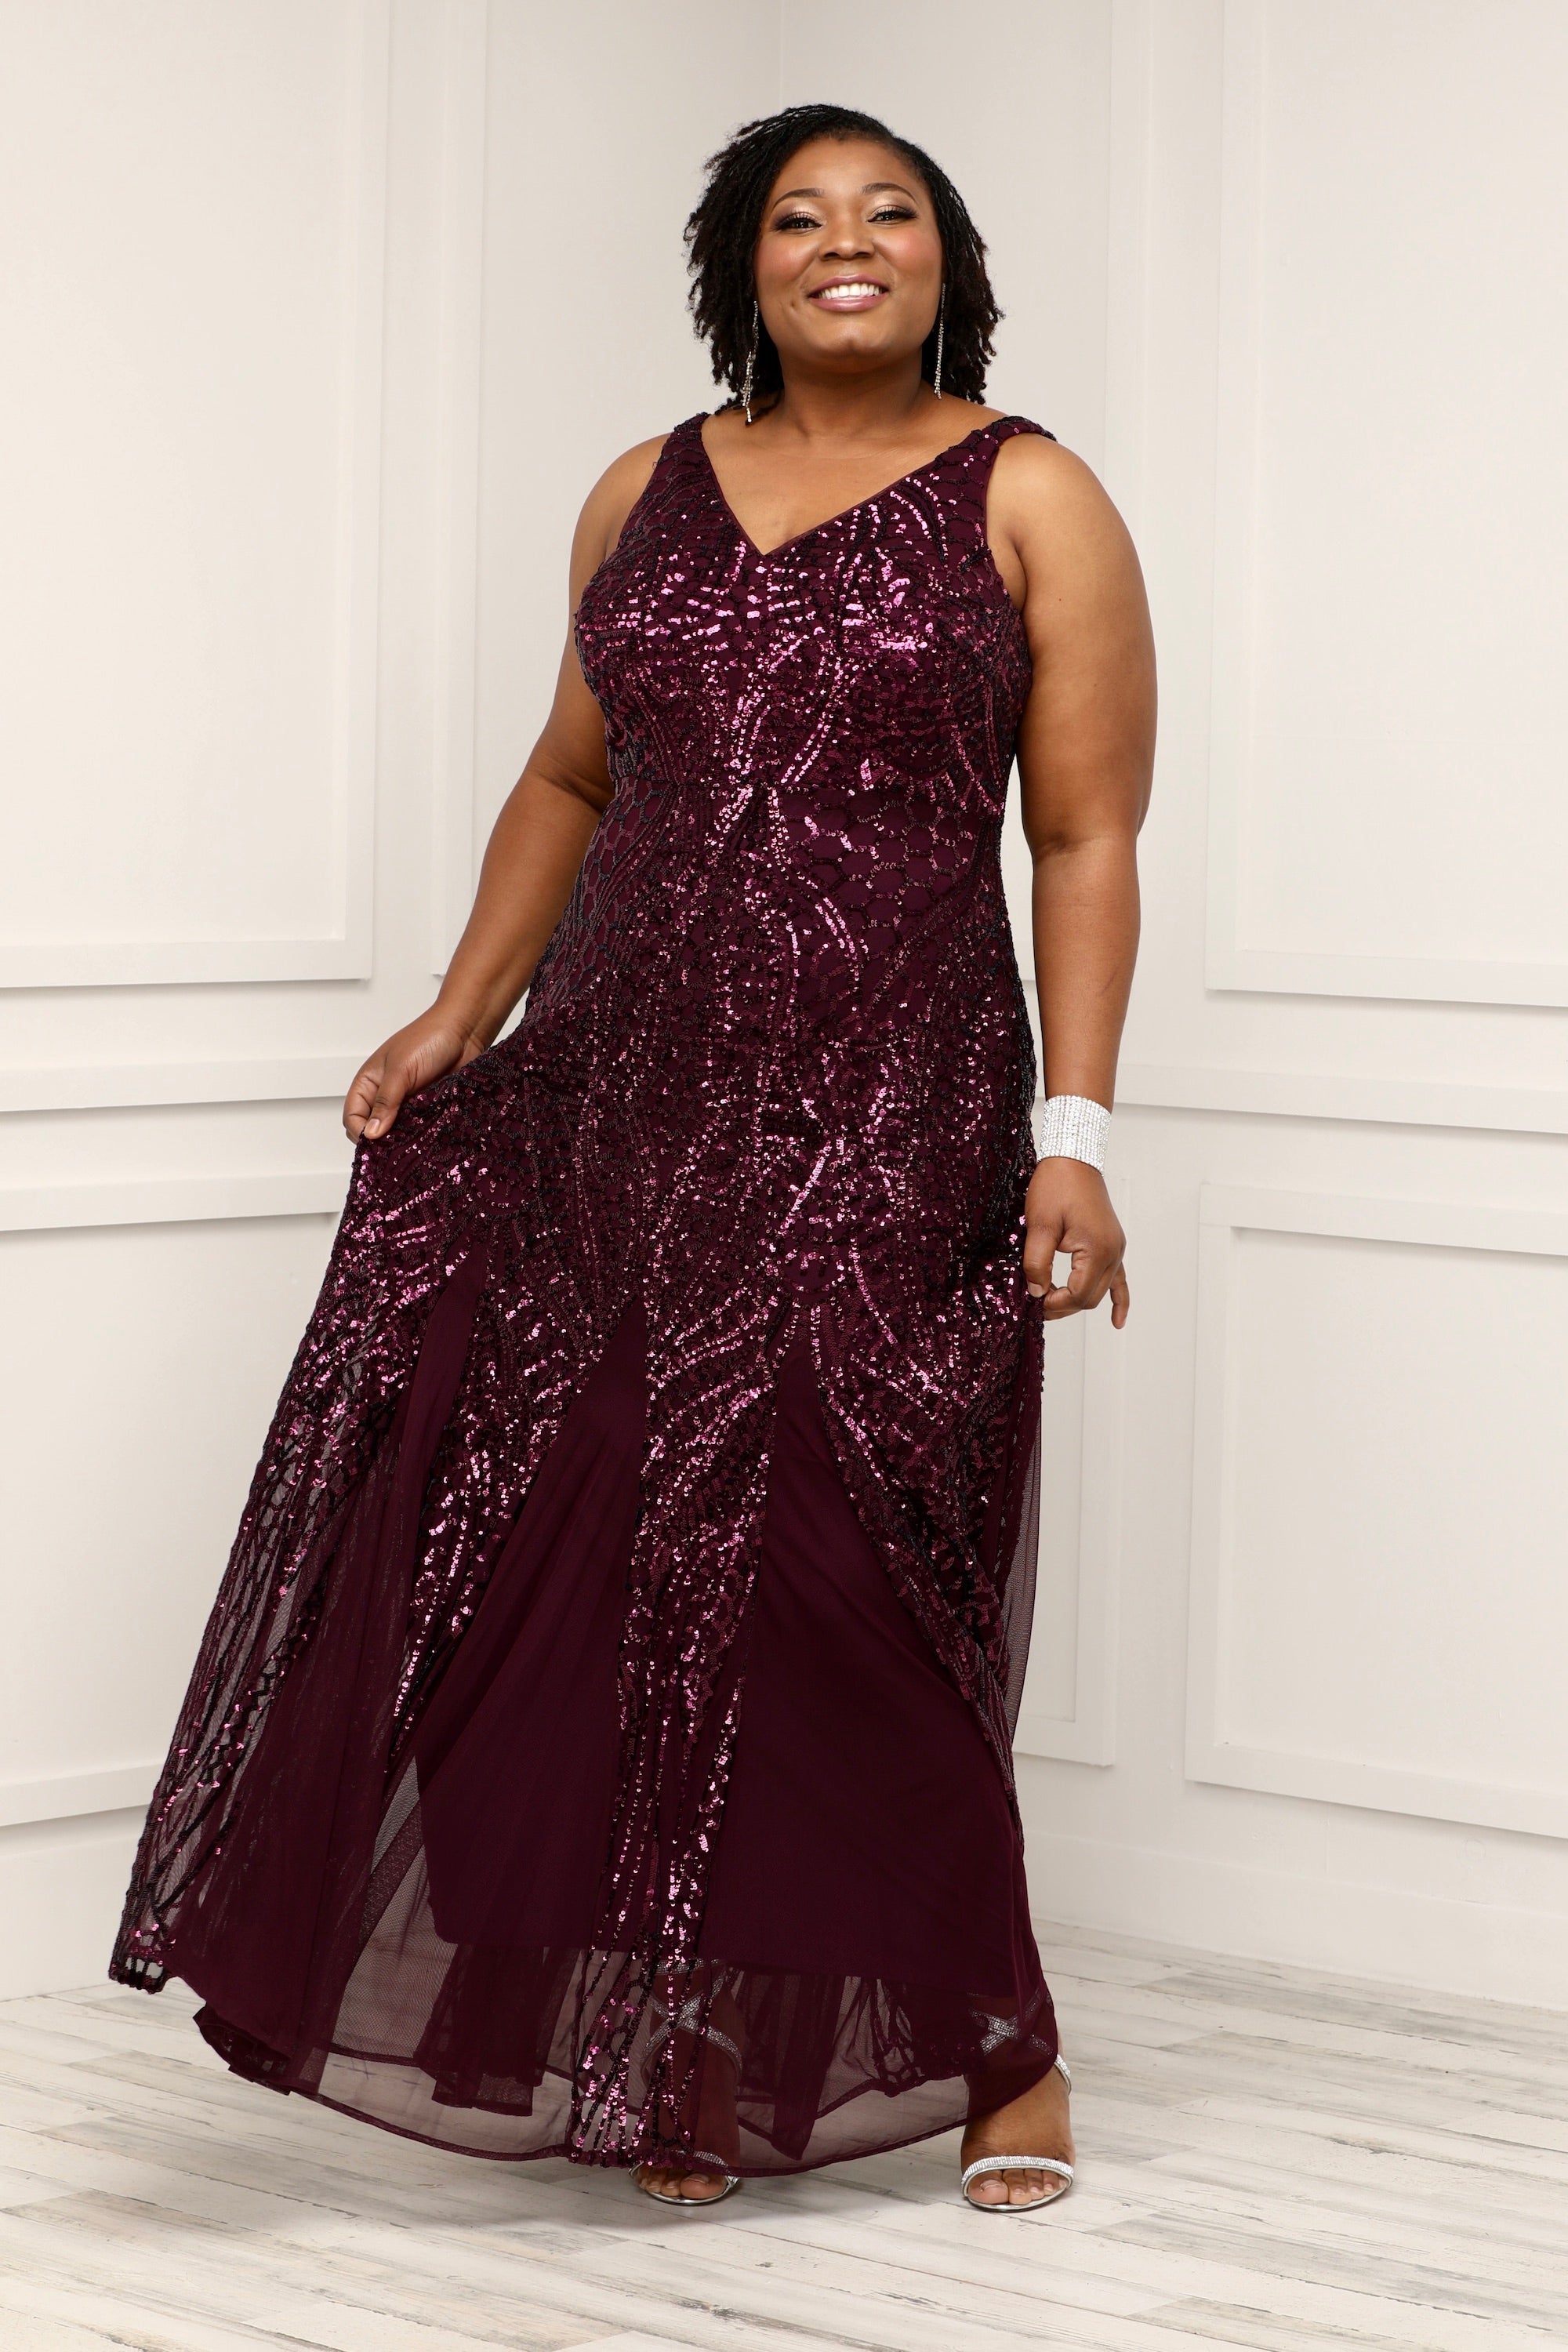 Plus-Size Formal Dresses & Evening Gowns | Nordstrom